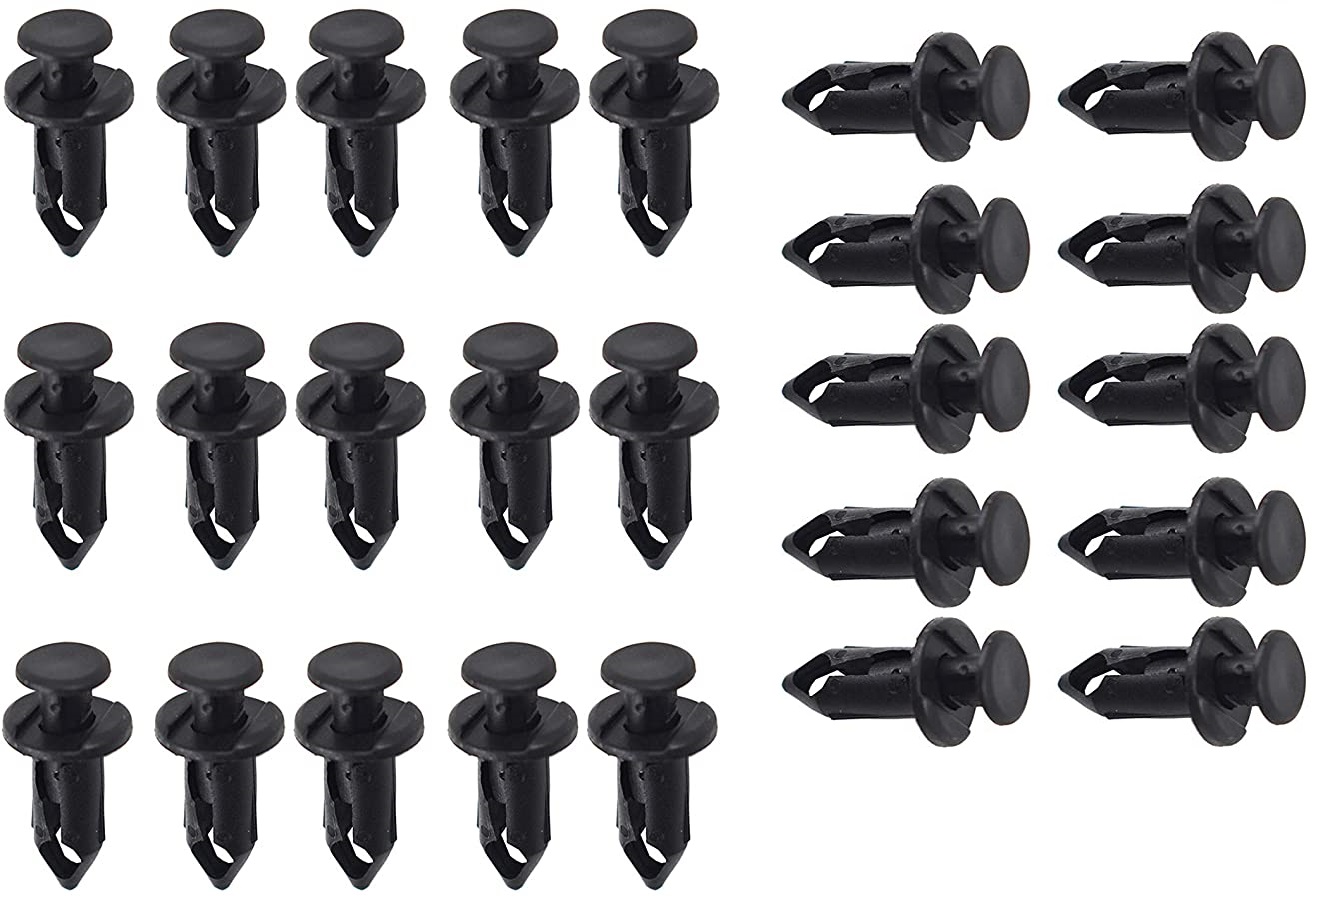 KRX & KRX4 Replacement Push Pins Body Clips, 10, 25, or 50